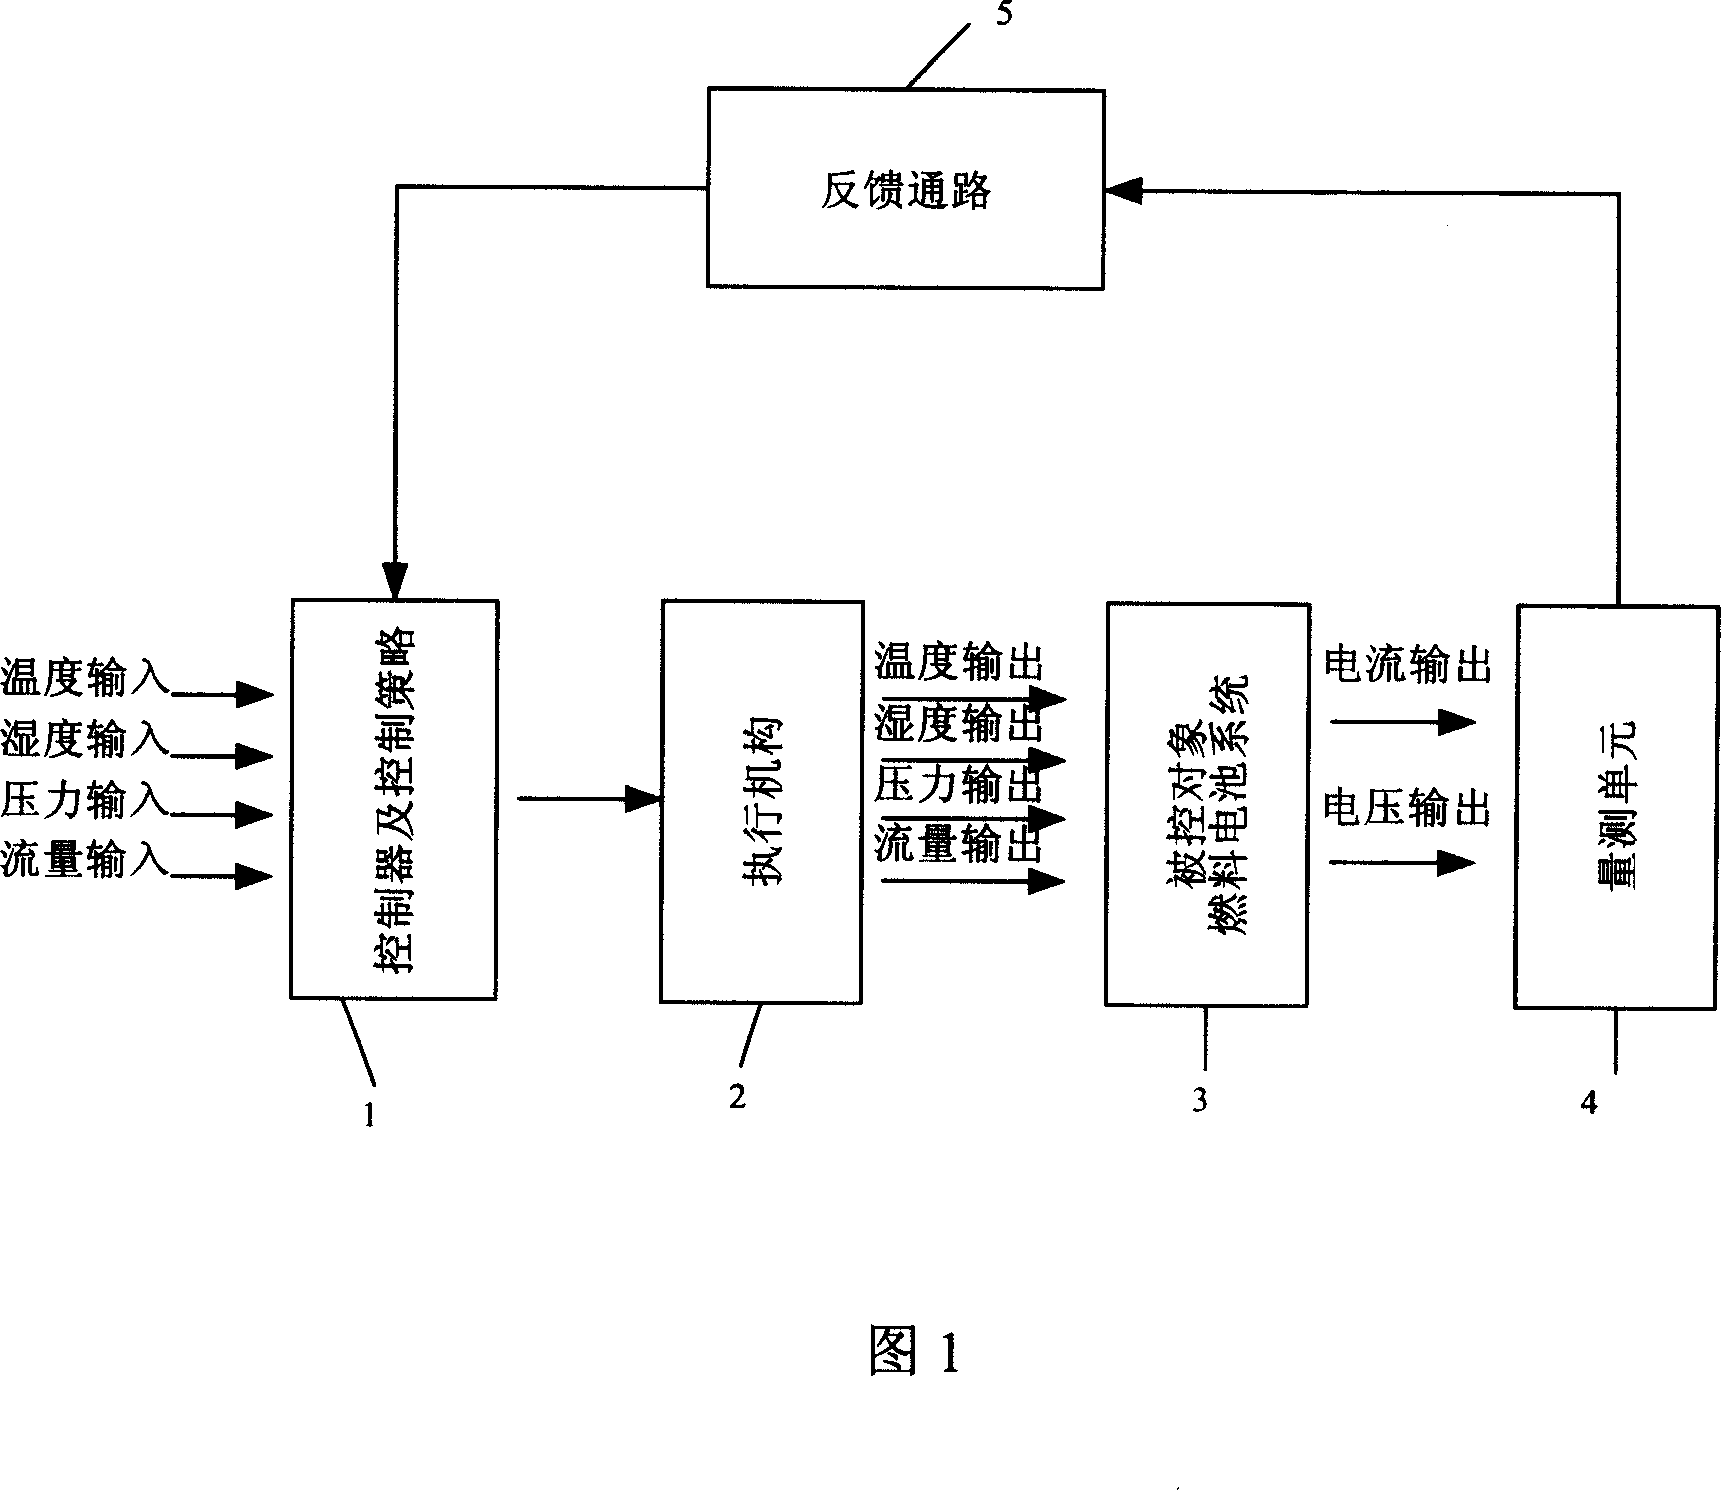 A control system and control method for fuel battery